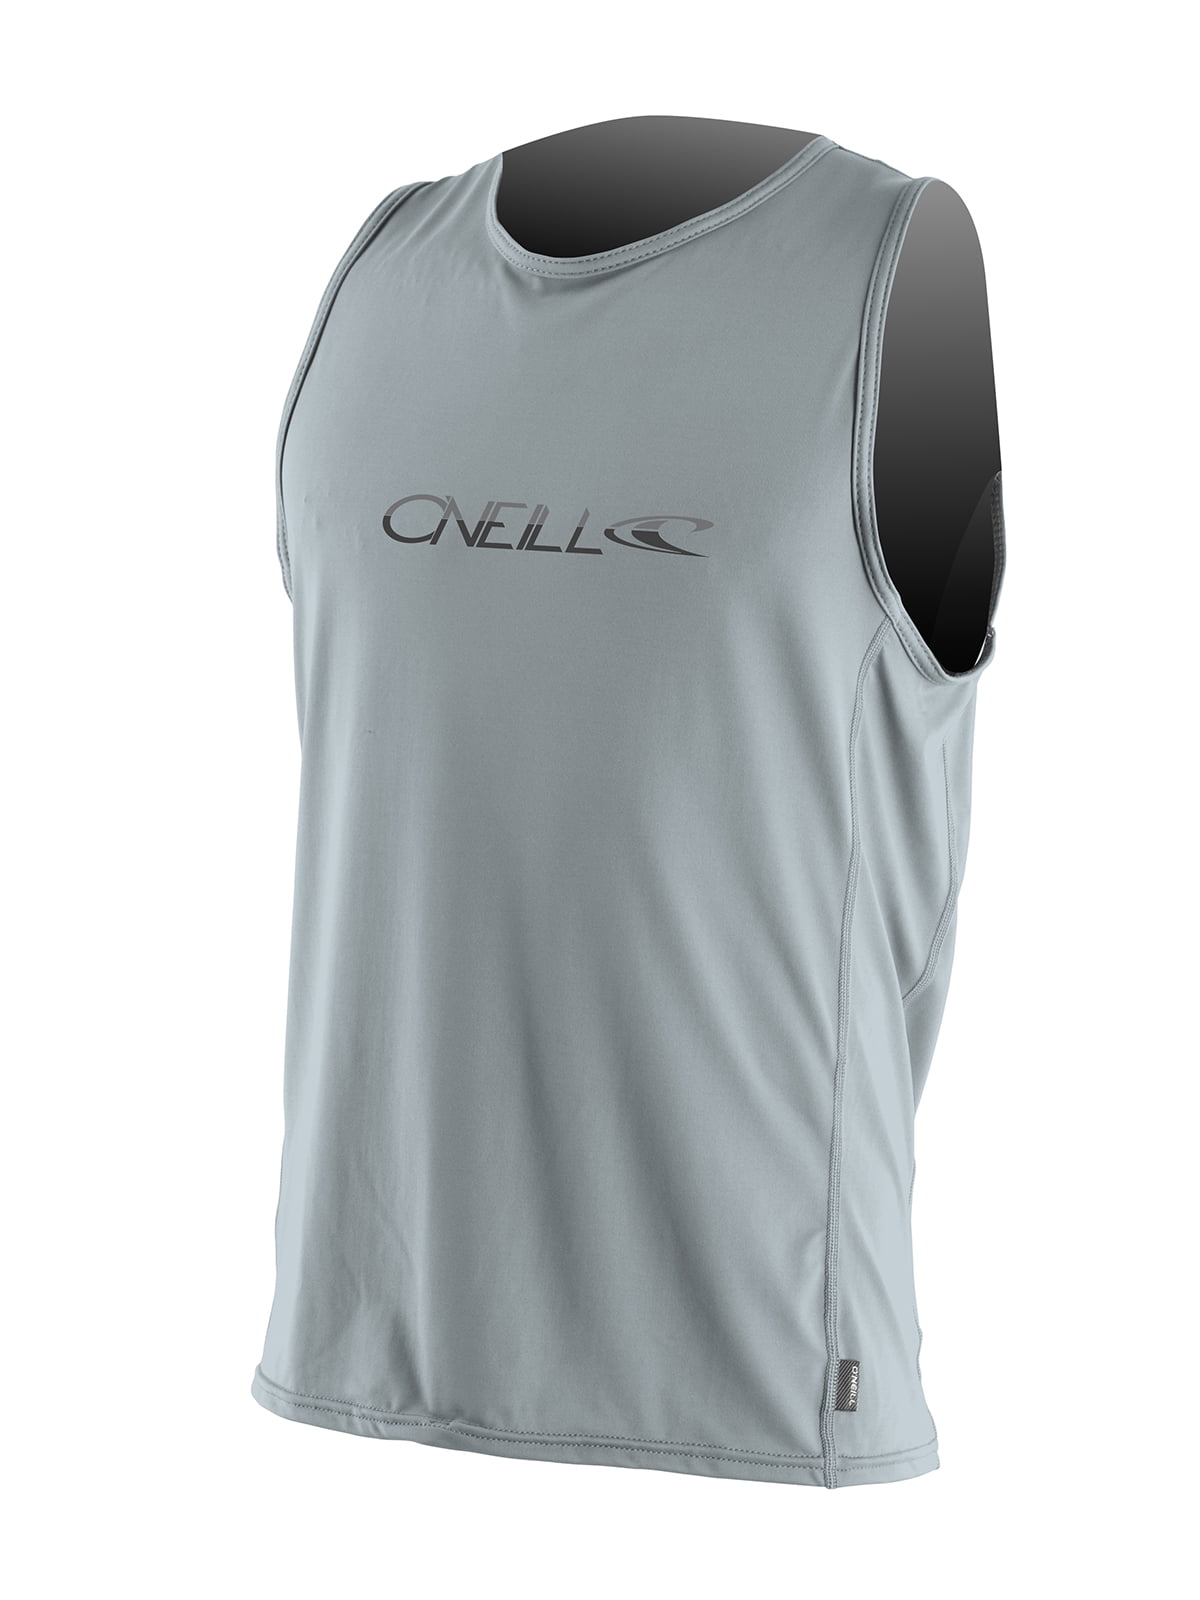 Loose fit 30 breathable shirt SPF Details about   O'Neill men's 24/7 sleeveless 